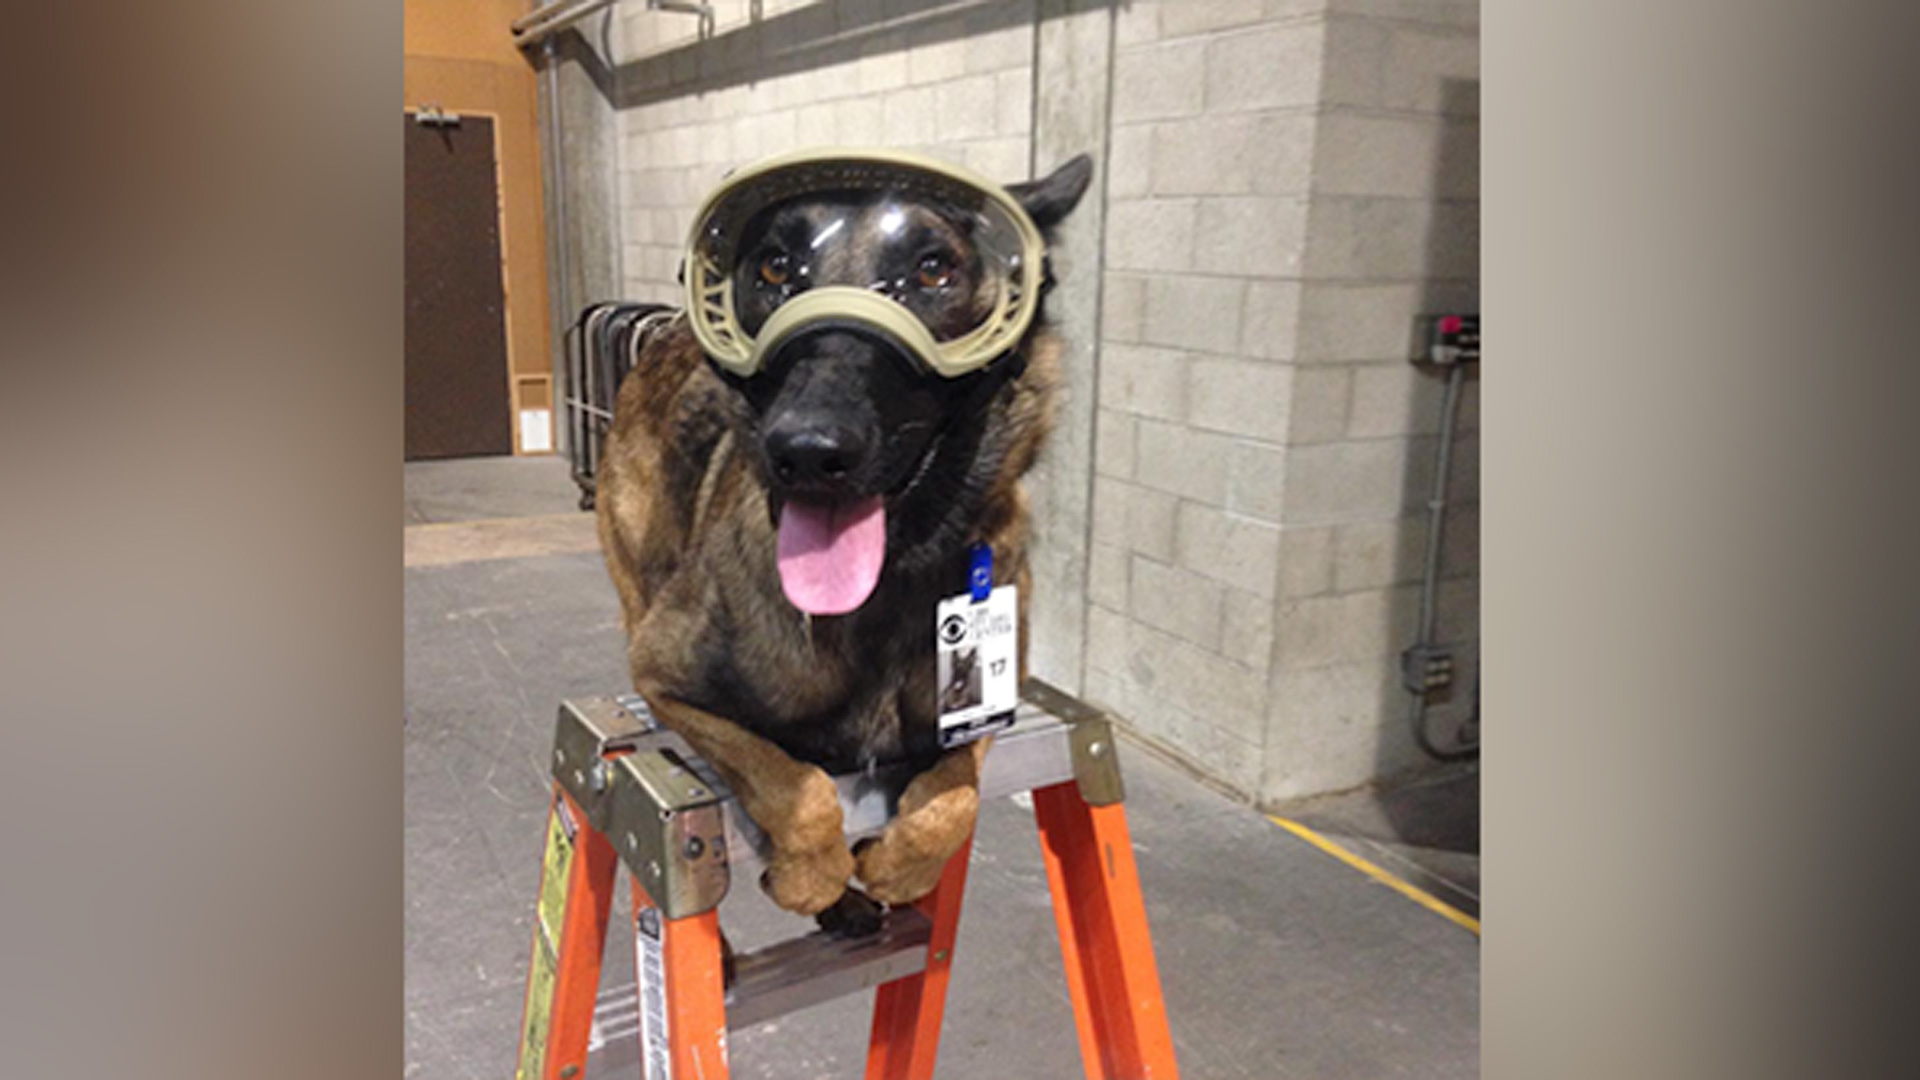 It's all about safety first for this pup